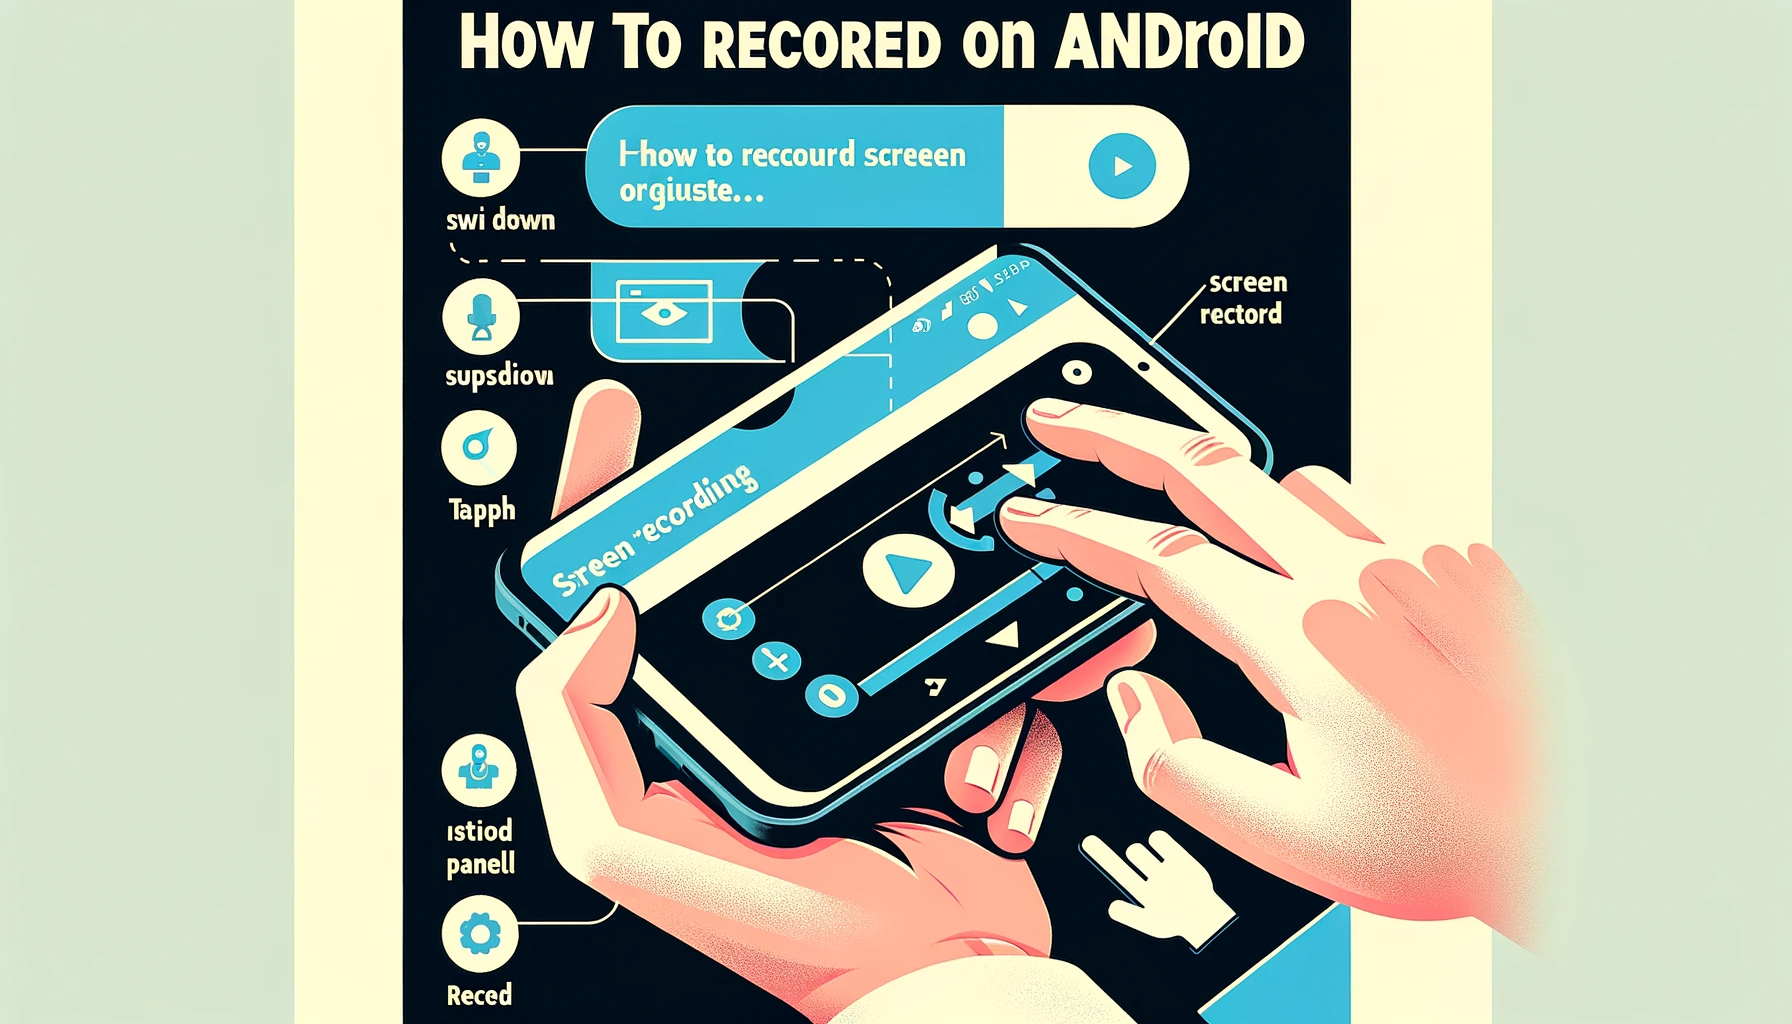 How To Record Screen On Android